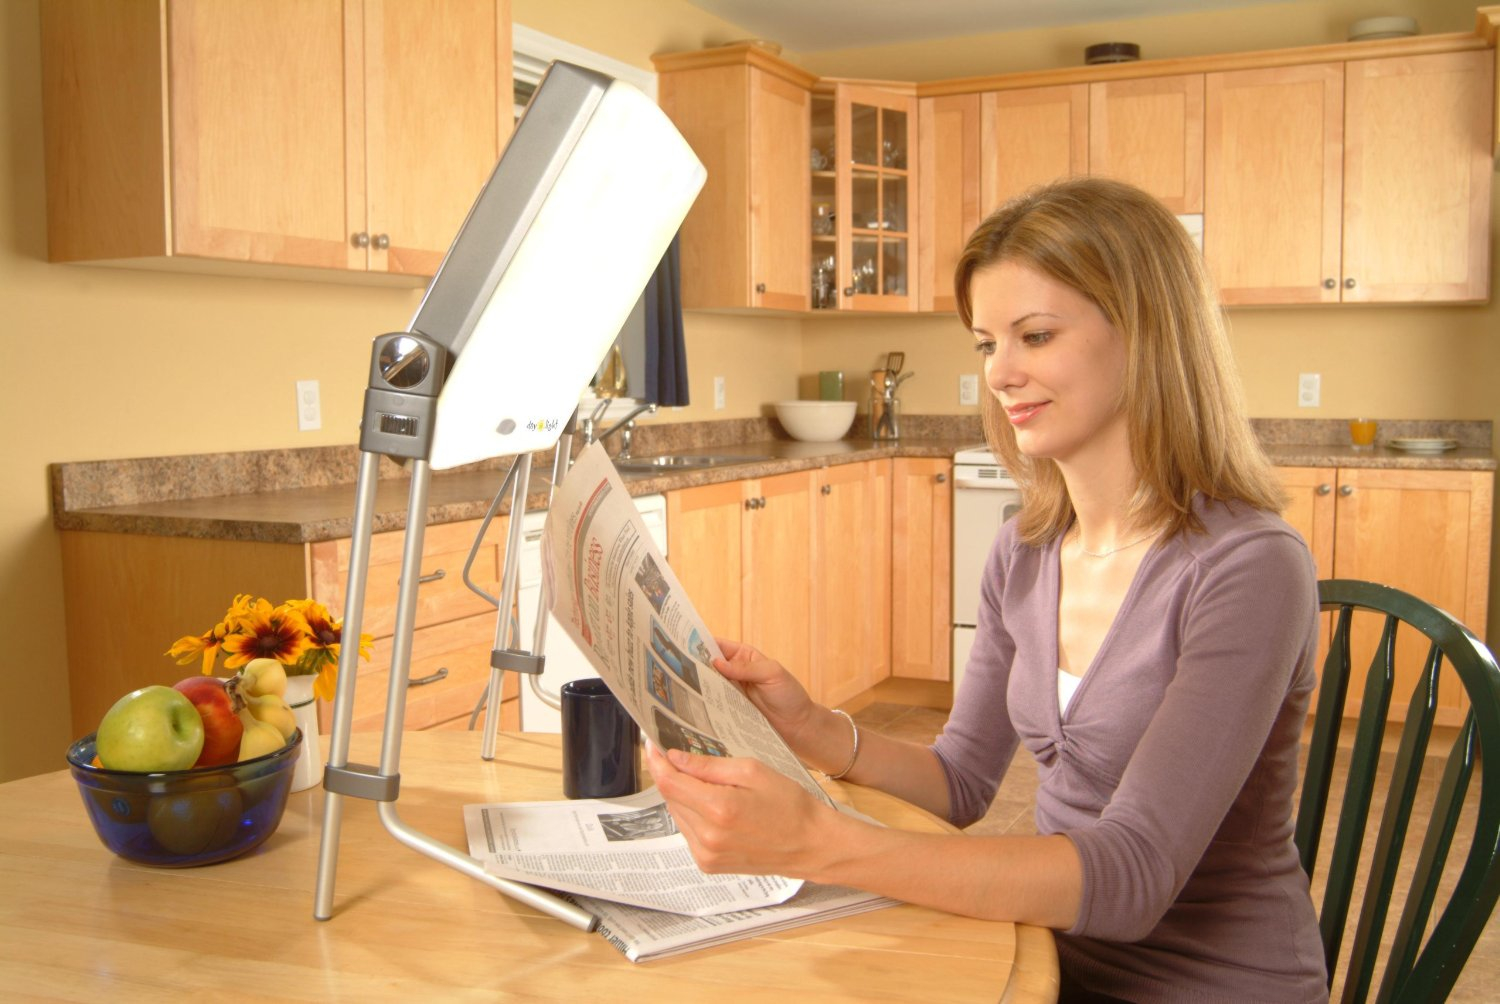 Lift Your Sad Depression With Diy Light Therapy At Home Hubpages in sizing 1500 X 1004